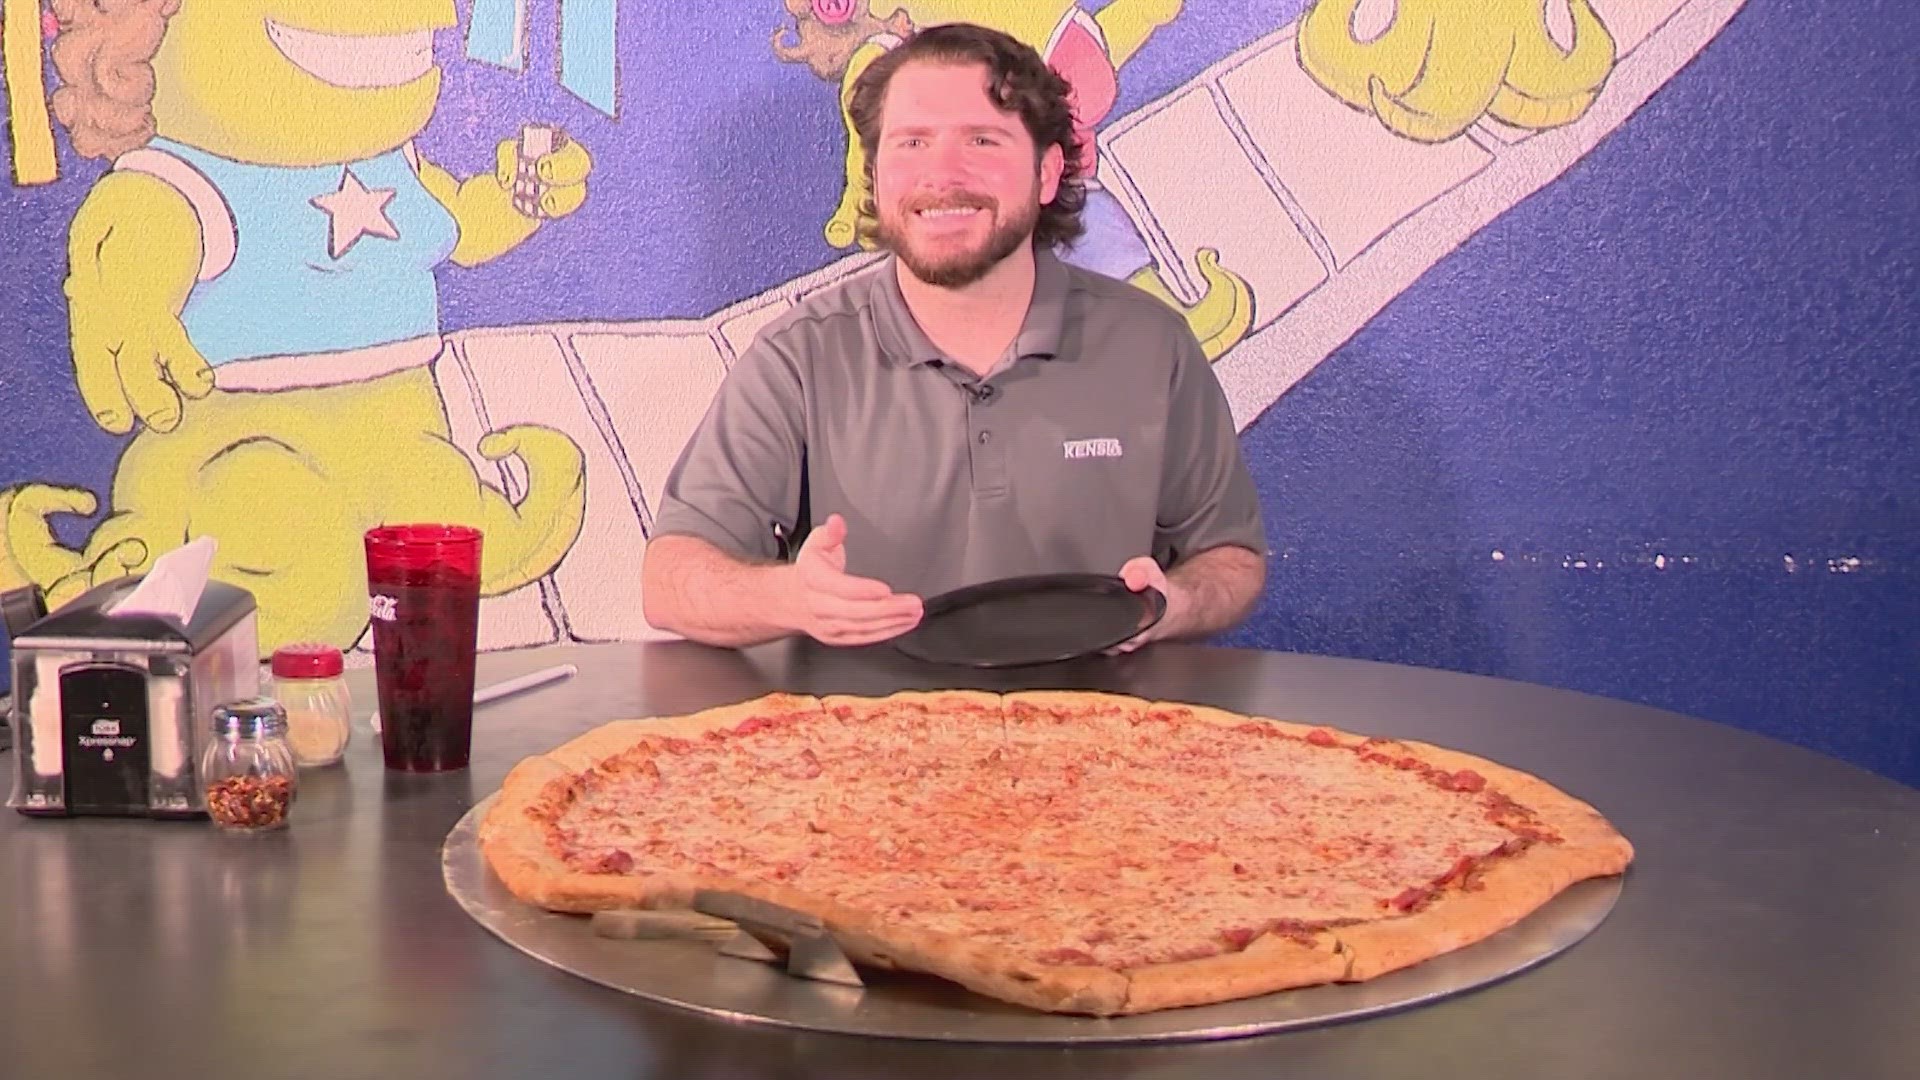 MAAR's Pizza is a family-owned business that serves up a huge 28-inch pizza that only one group of three has ever completed. Luke takes it on by himself, or does he?